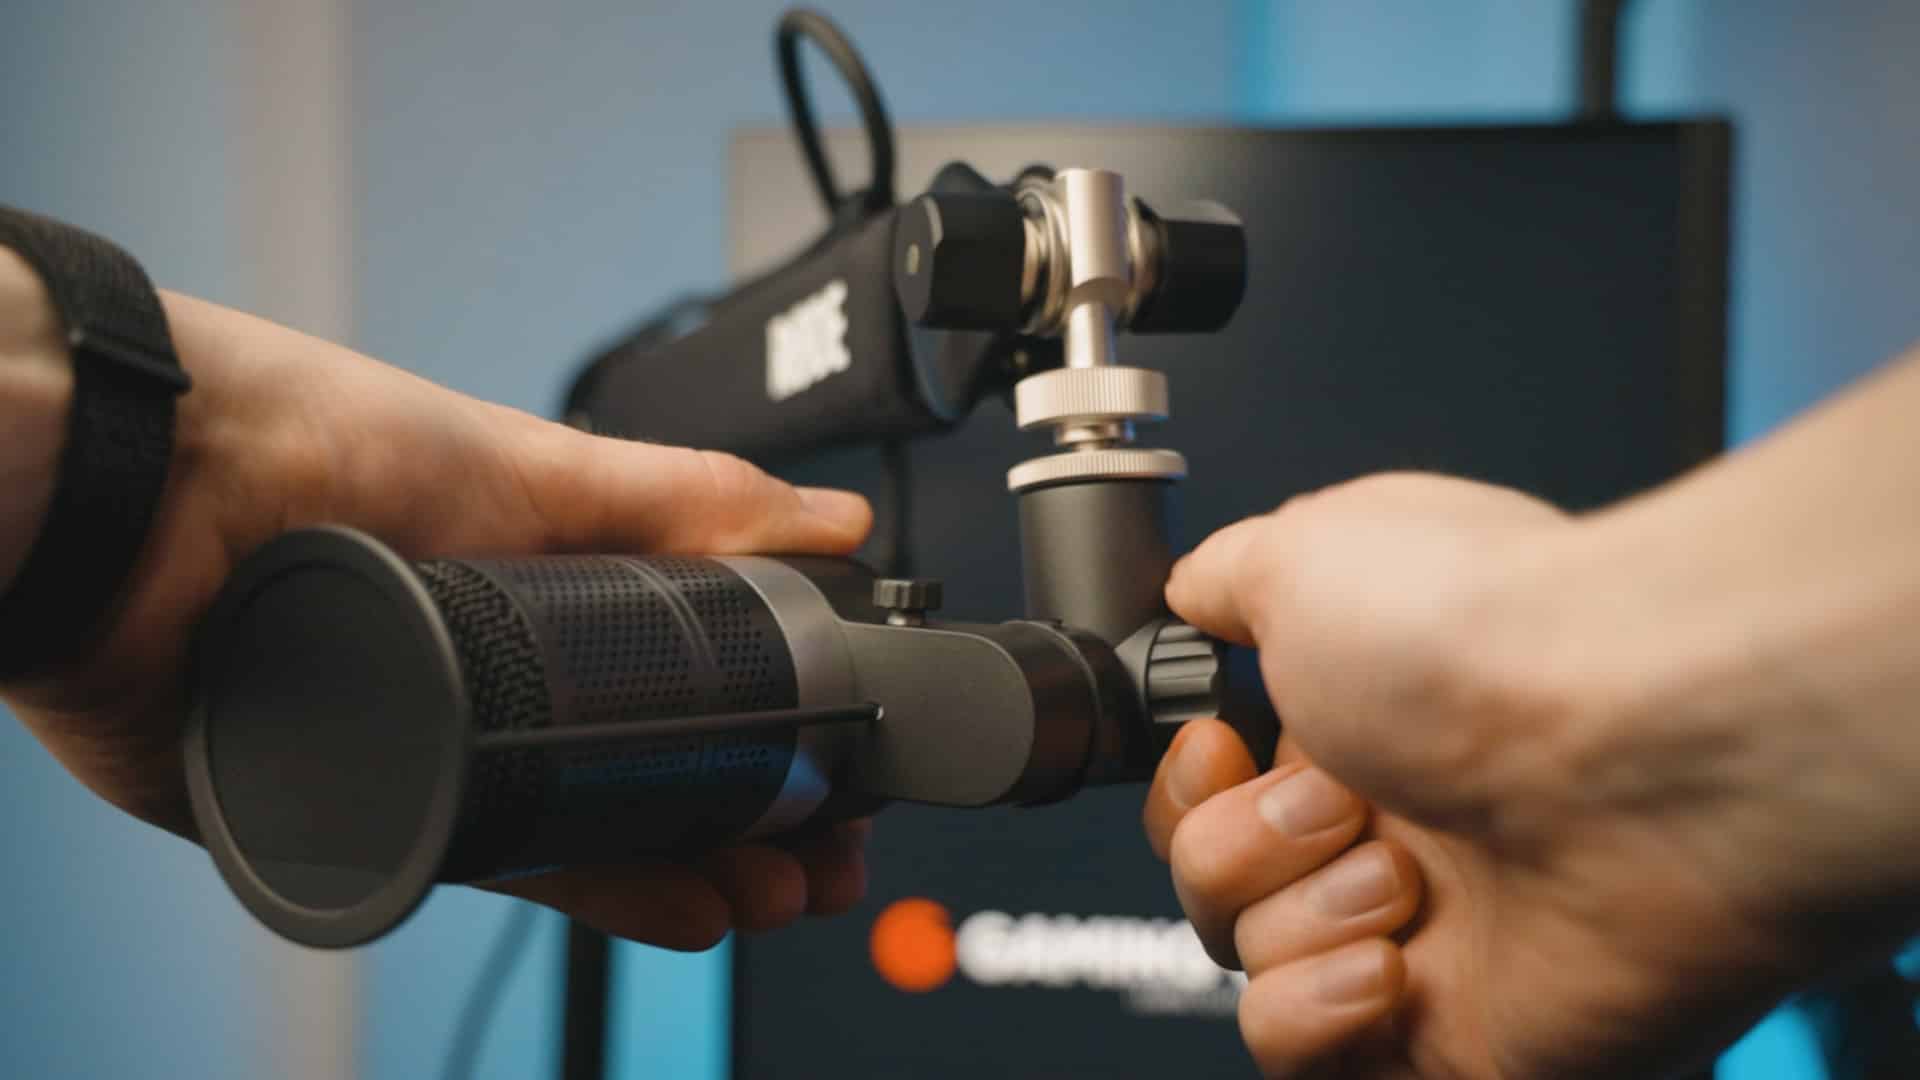 Mounting a microphone on a mic arm or boom arm - Advanced Mic Settings in OBS Studio